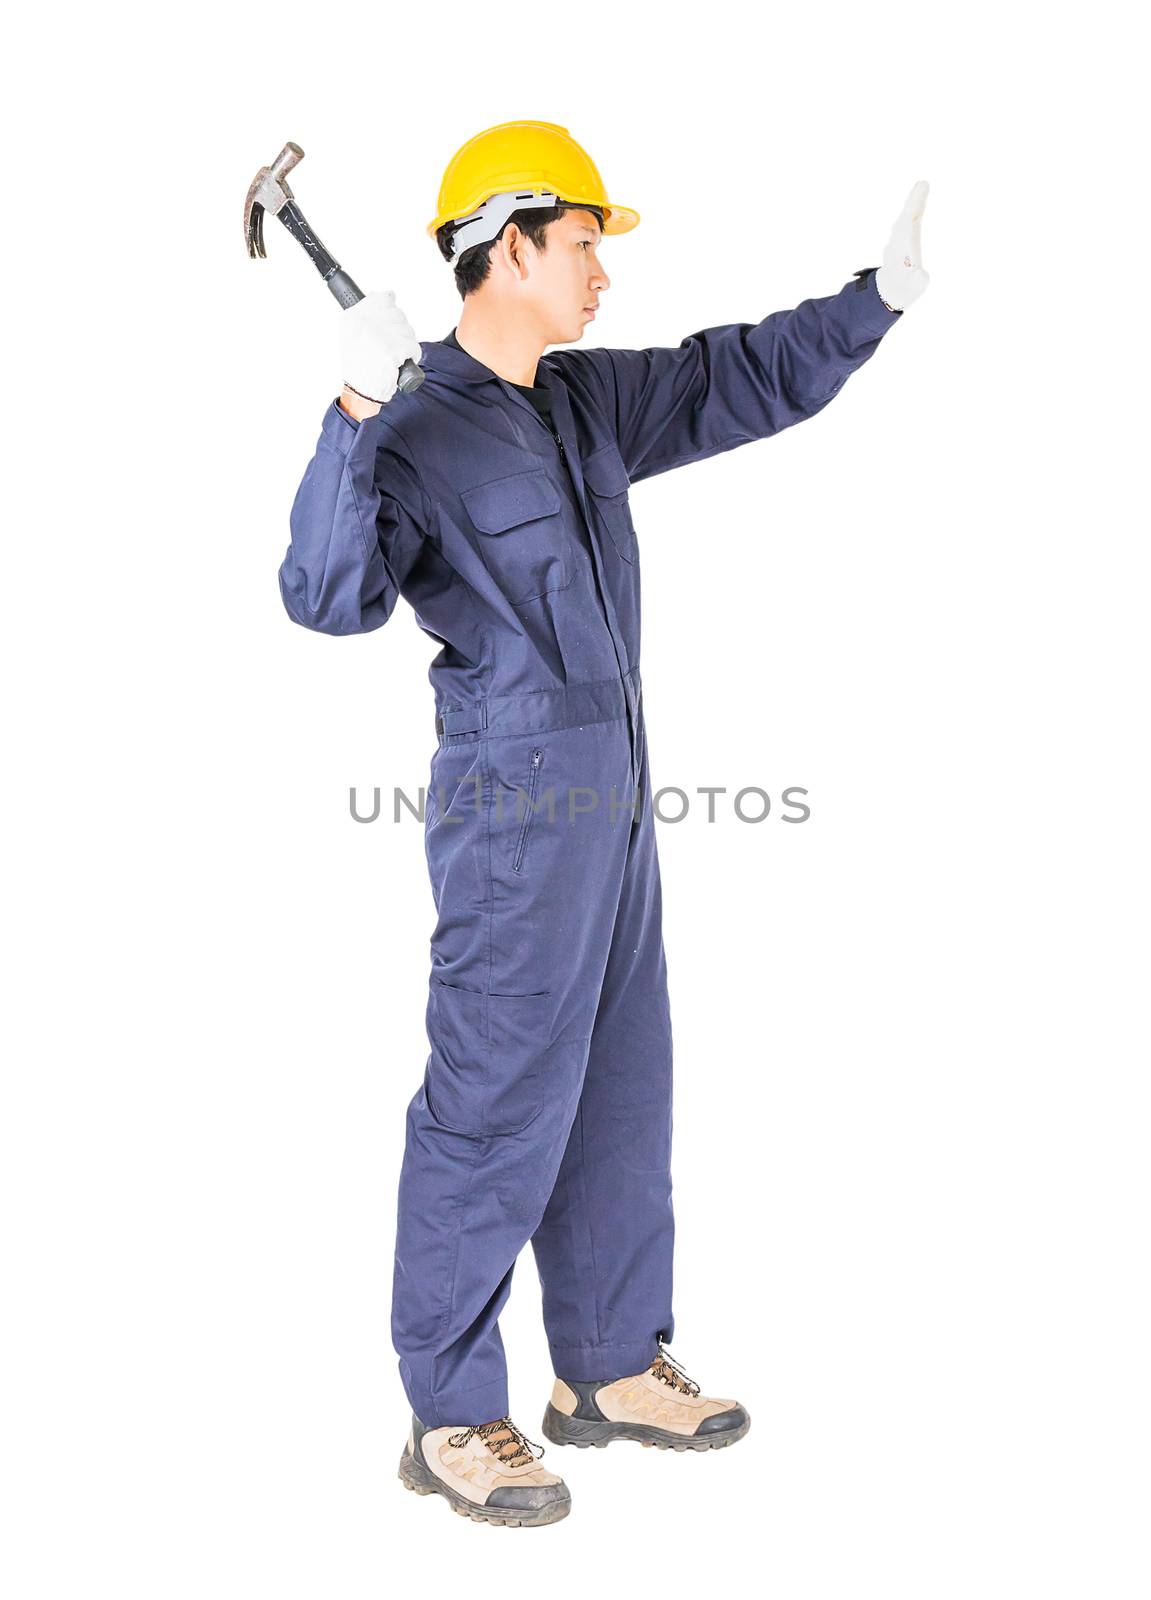 Young handyman in uniform standing with his hammer, Cutout isolated on white background